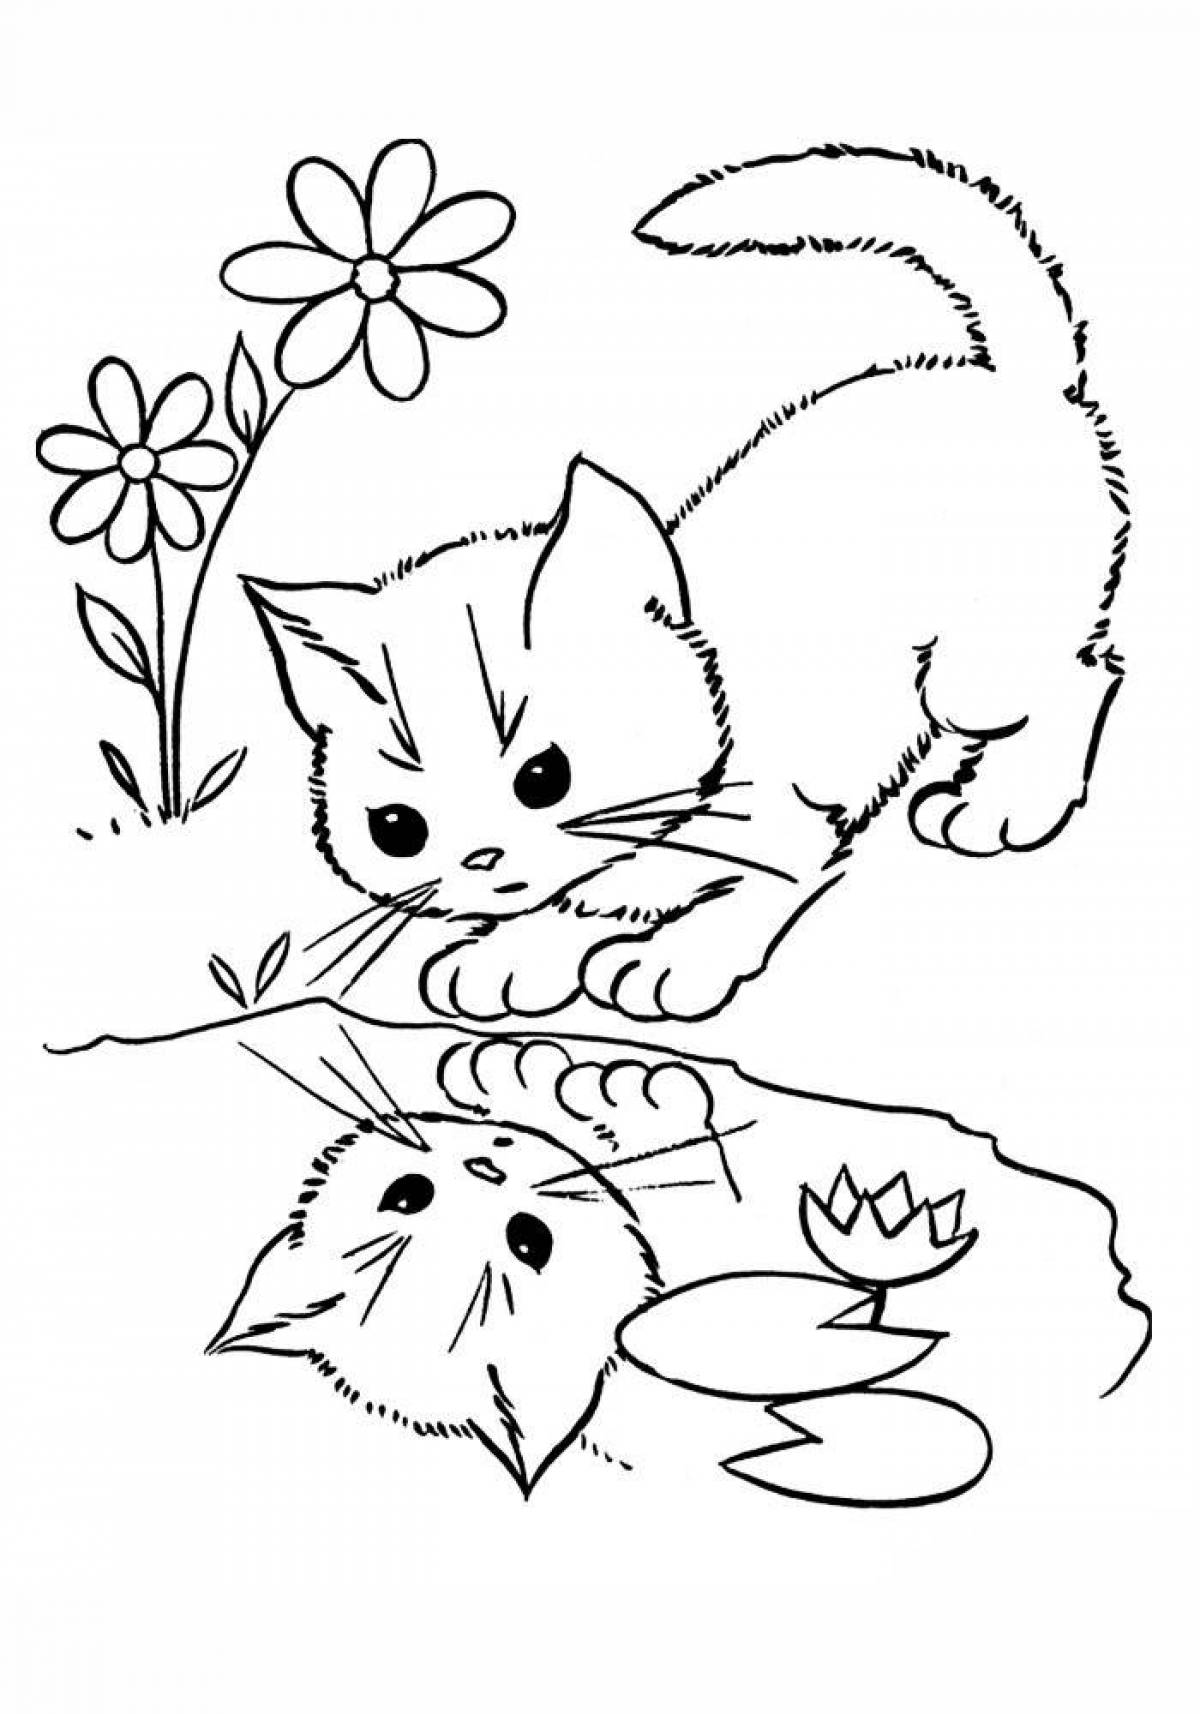 Joyful coloring cat with kittens